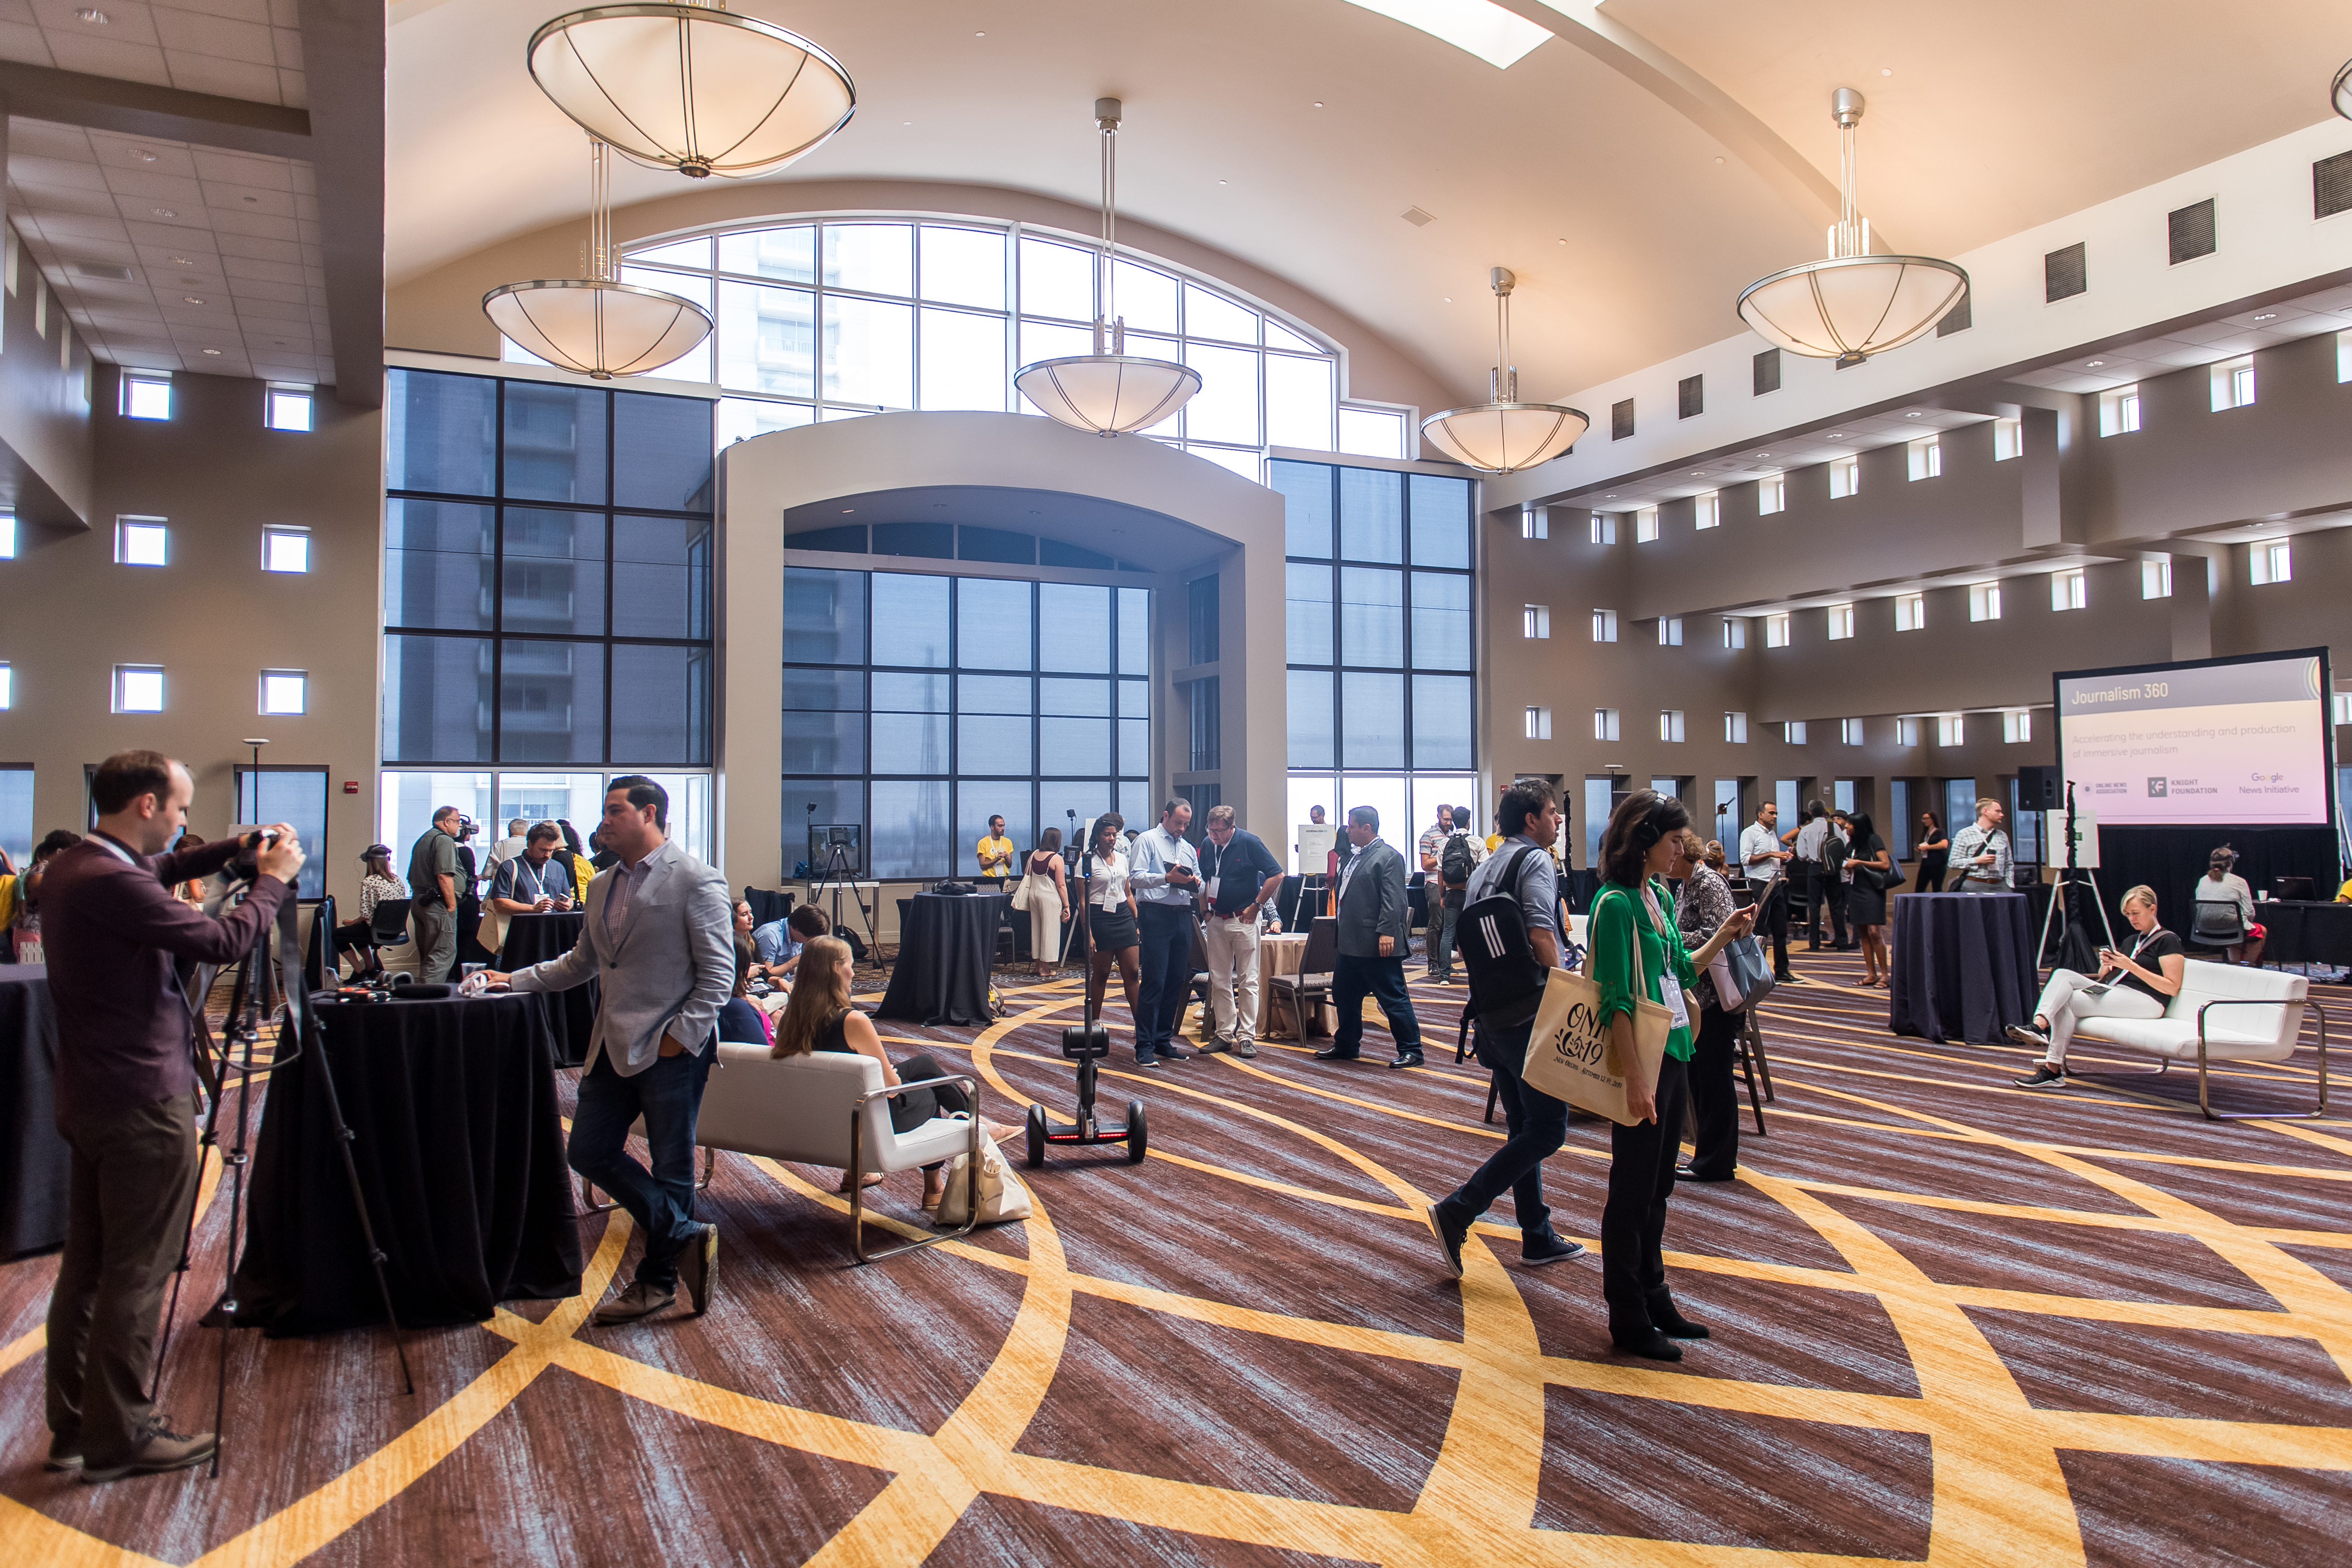 A view of the venue for the Journalism 360 Immersive Storytelling Festival at the 2019 Online News Association Conference in New Orleans.